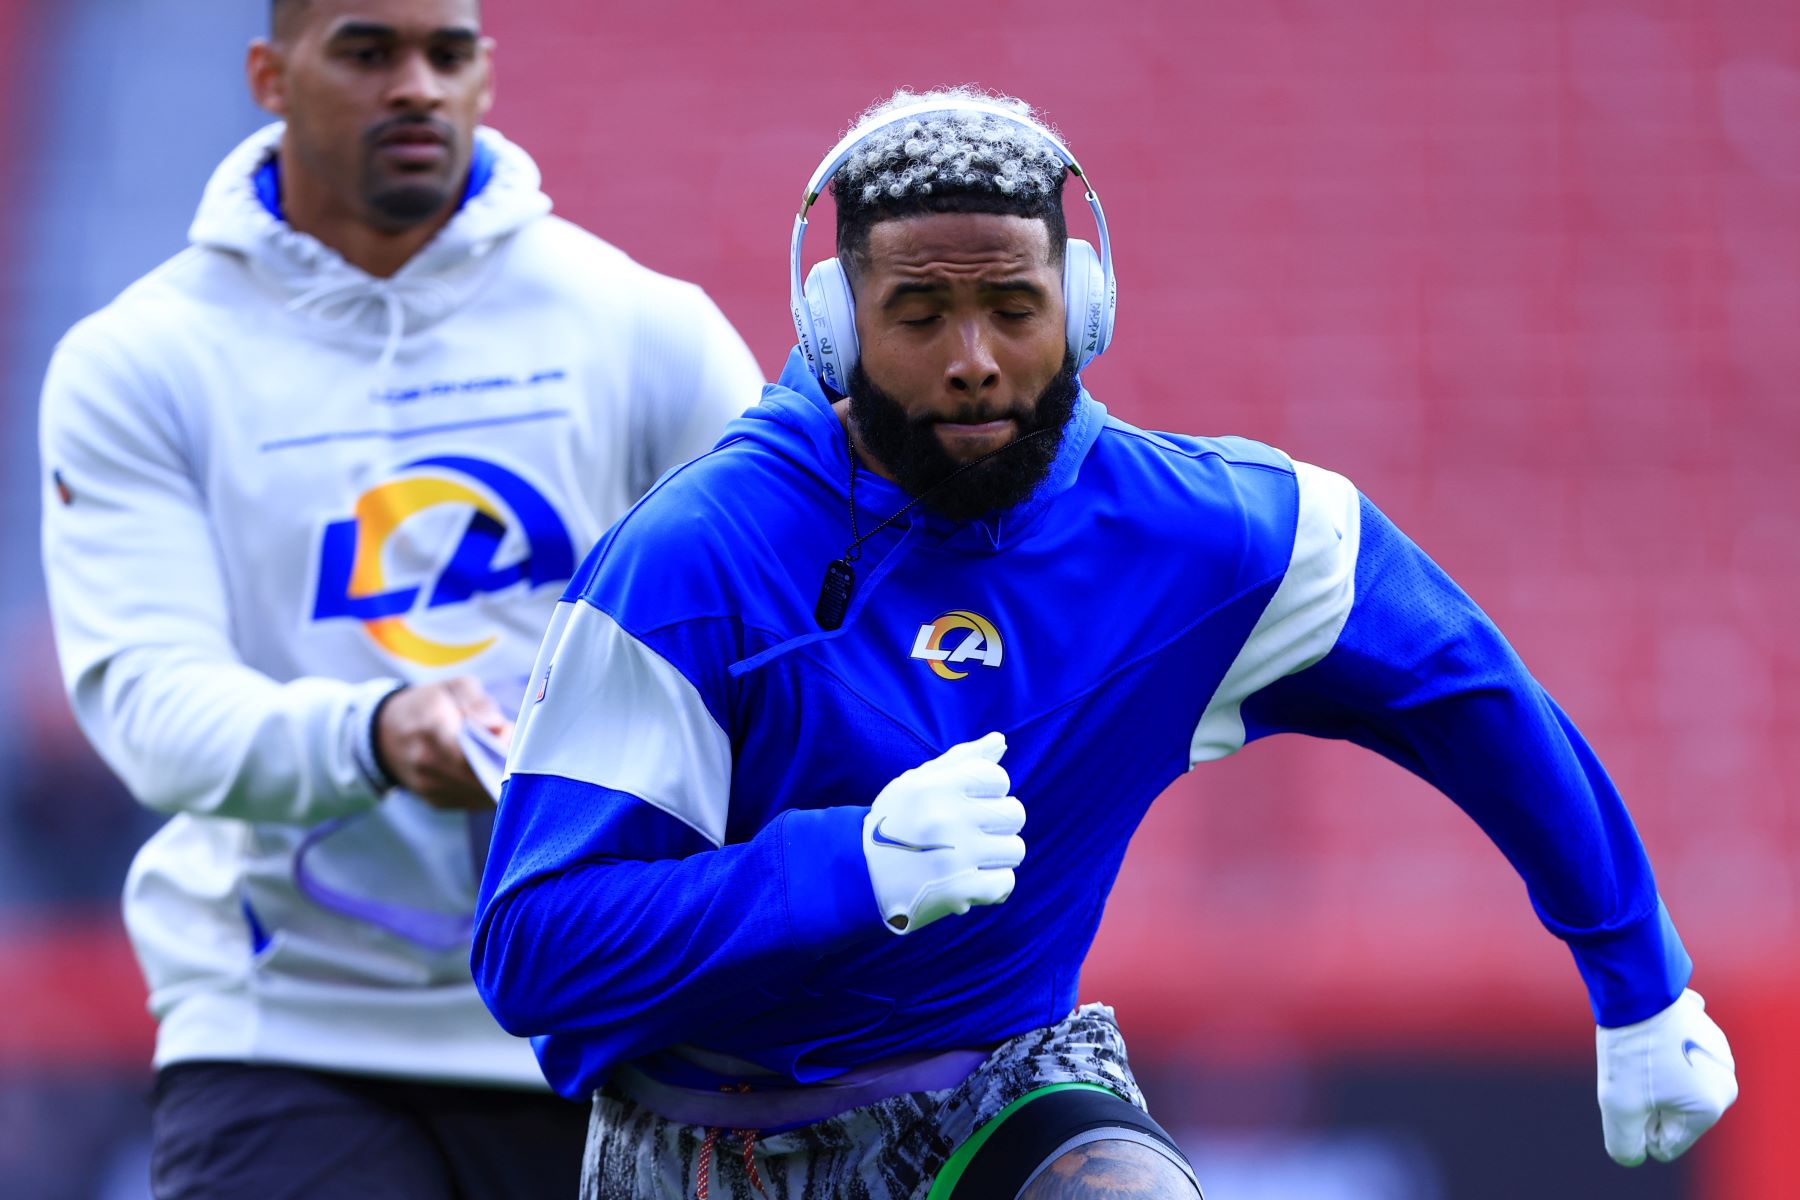 Wide receiver Odell Beckham Jr. #3 of the Los Angeles Rams warming up before a playoff game against the Tampa Bay Buccaneers